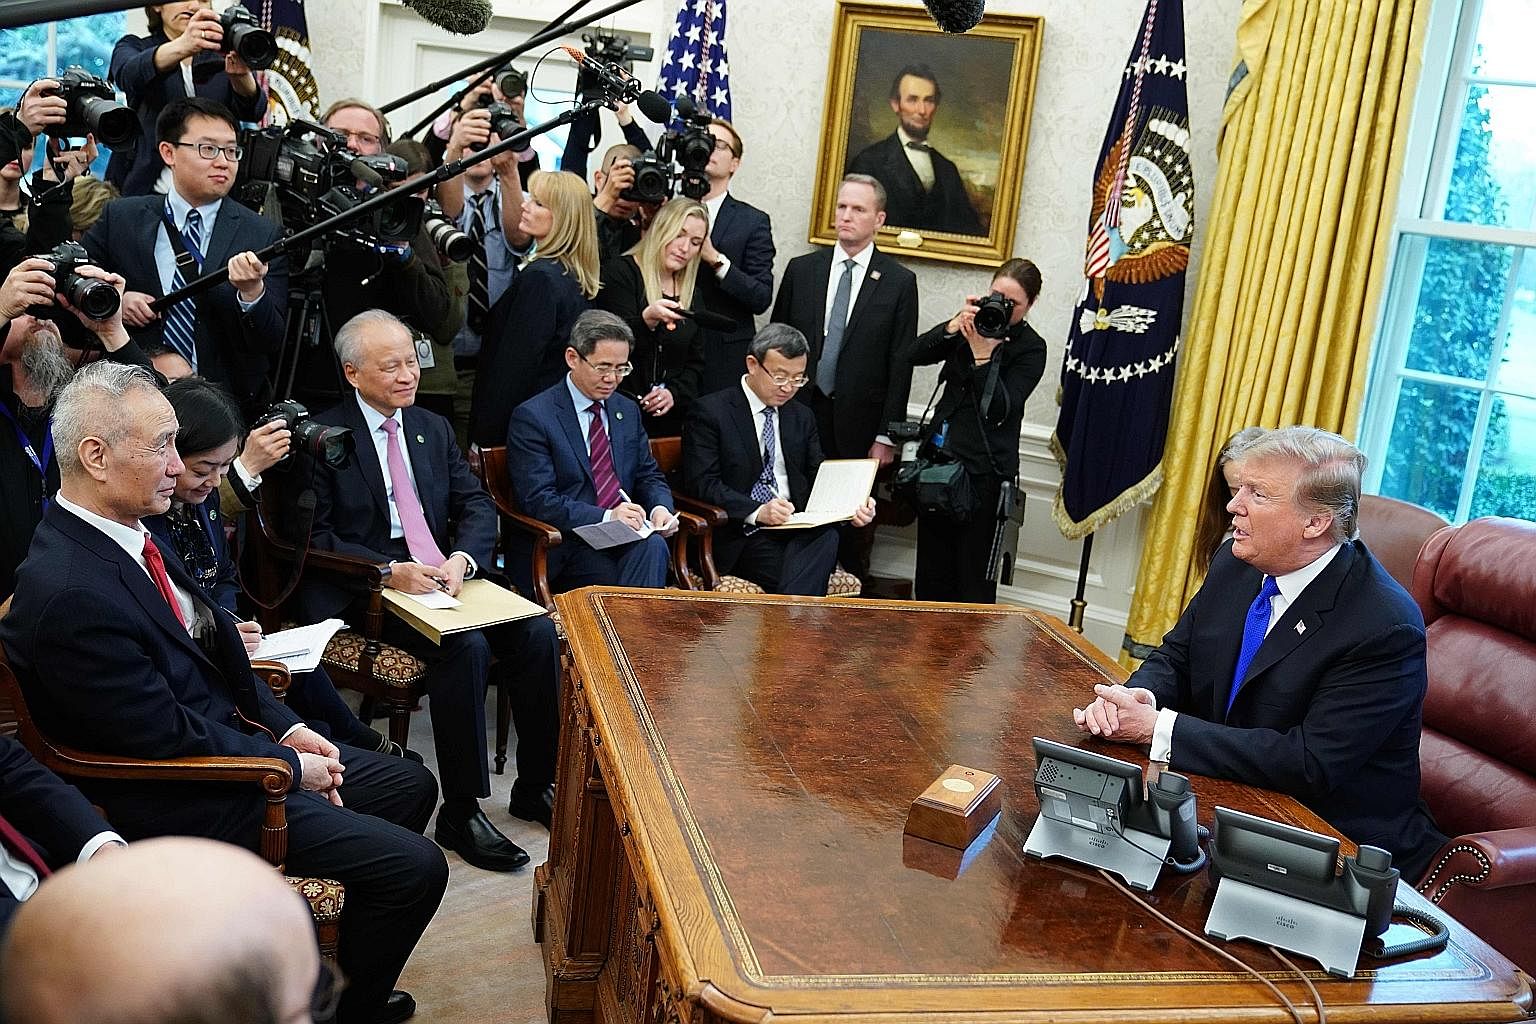 US President Donald Trump in a meeting with China's Vice-Premier Liu He (far left) in the White House's Oval Office on Friday.